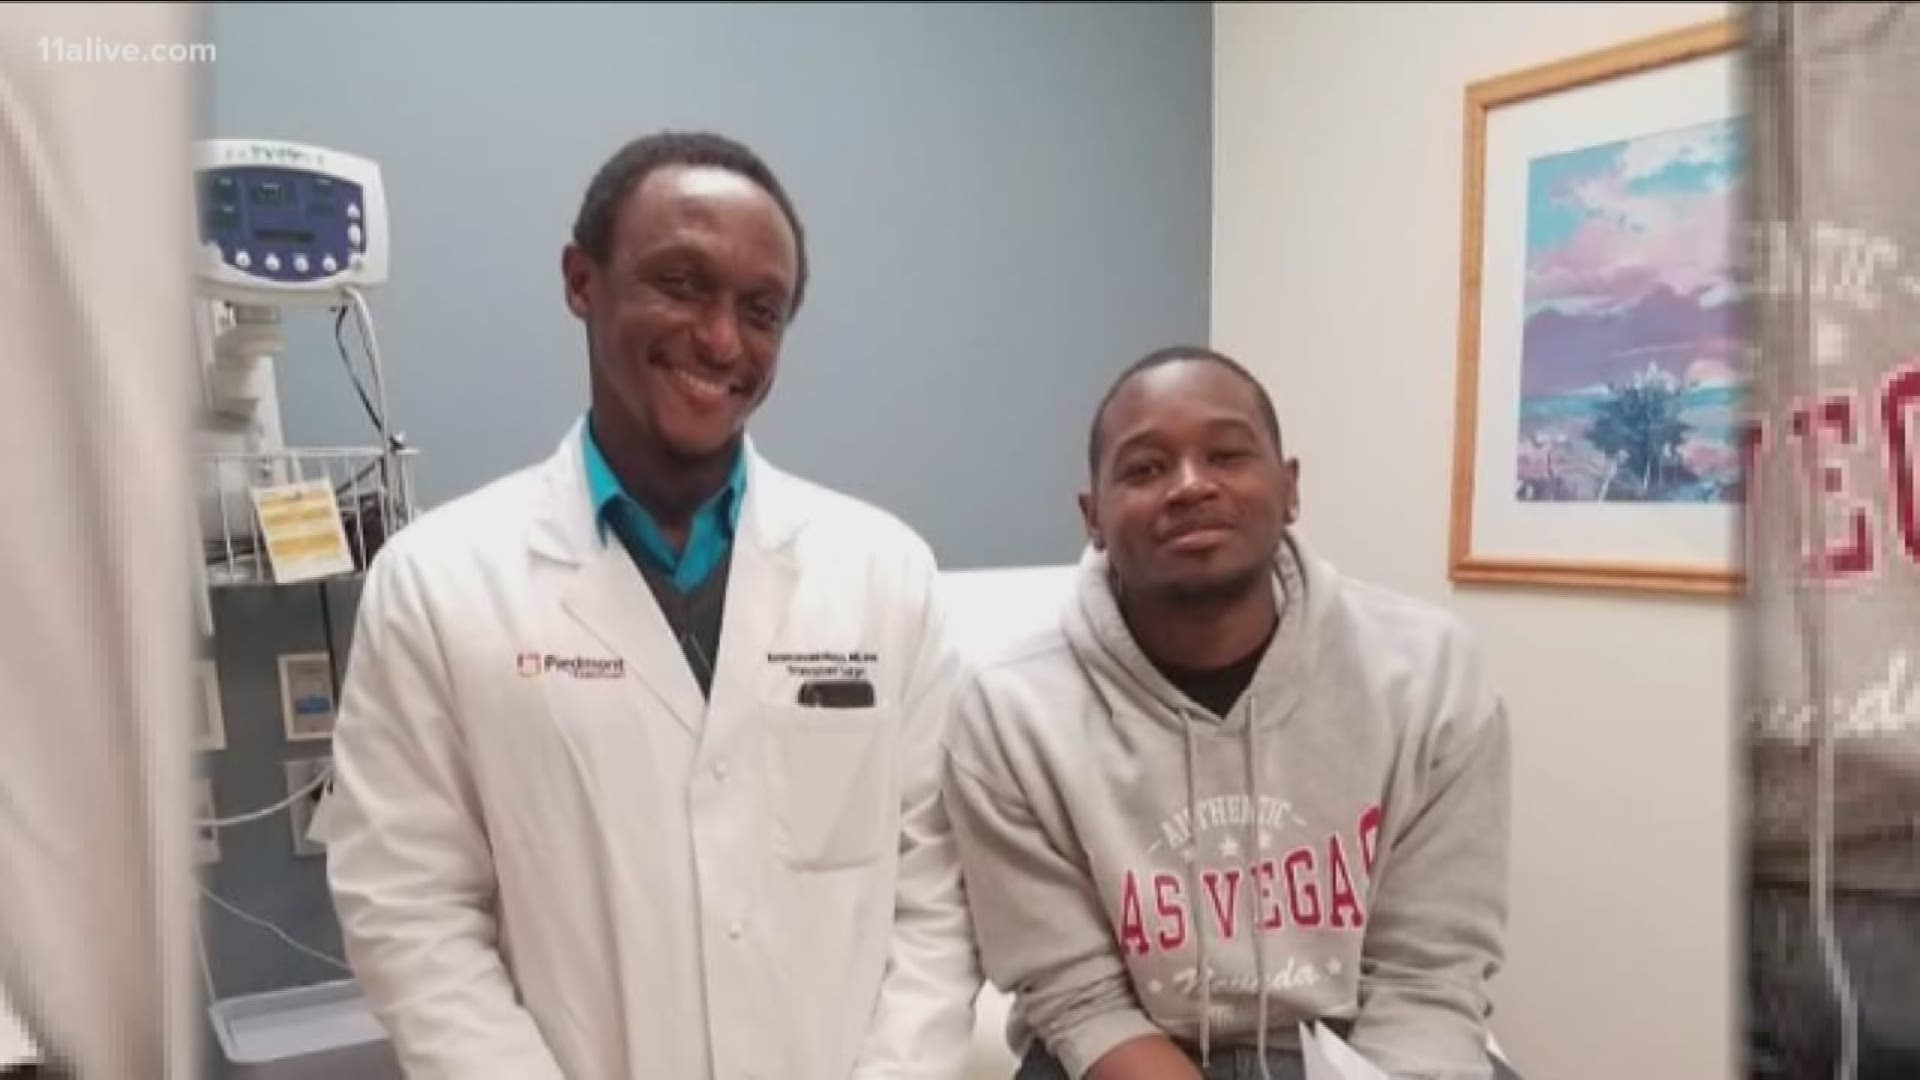 Dante Sipp just met with his surgeon at Piedmont Atlanta and learned that the transplant will happen in just a week and a half. Dante has a kidney disease that doctors said “seems to have come out of nowhere” and has been on dialysis for over 5 years.